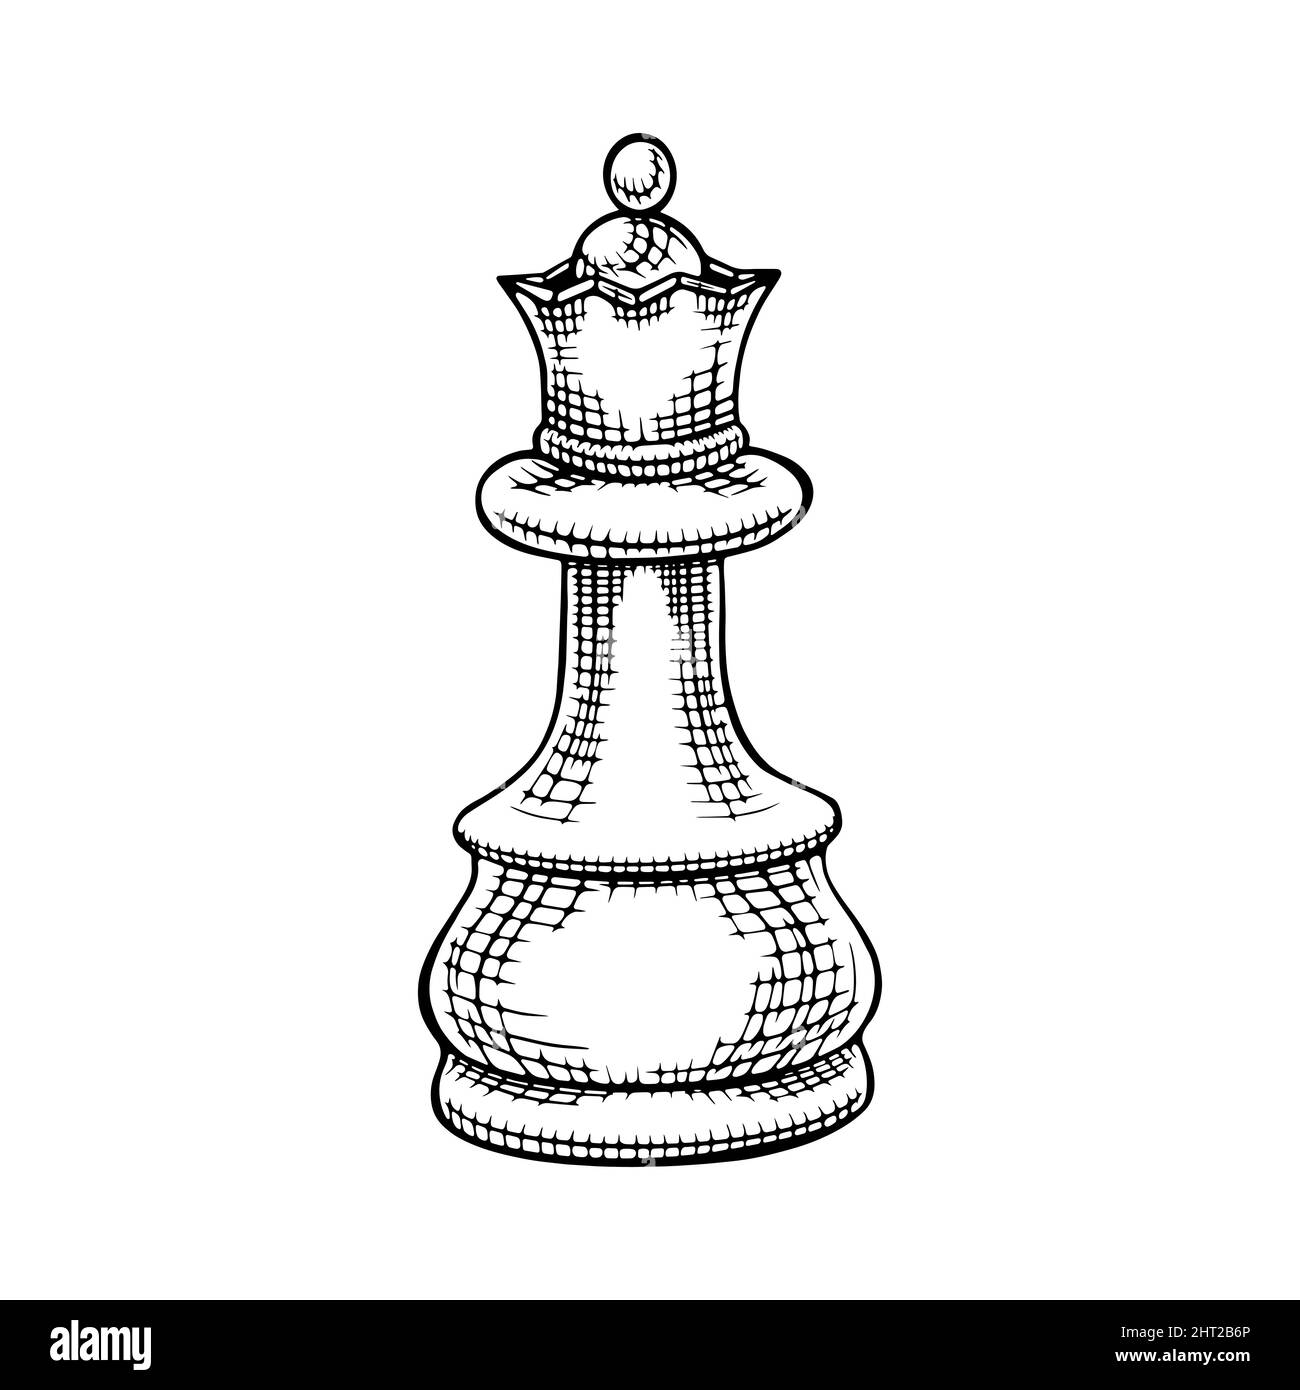 Hand drawn queen. Vintage chess piece isolated on white background. Vector illustration. Stock Vector